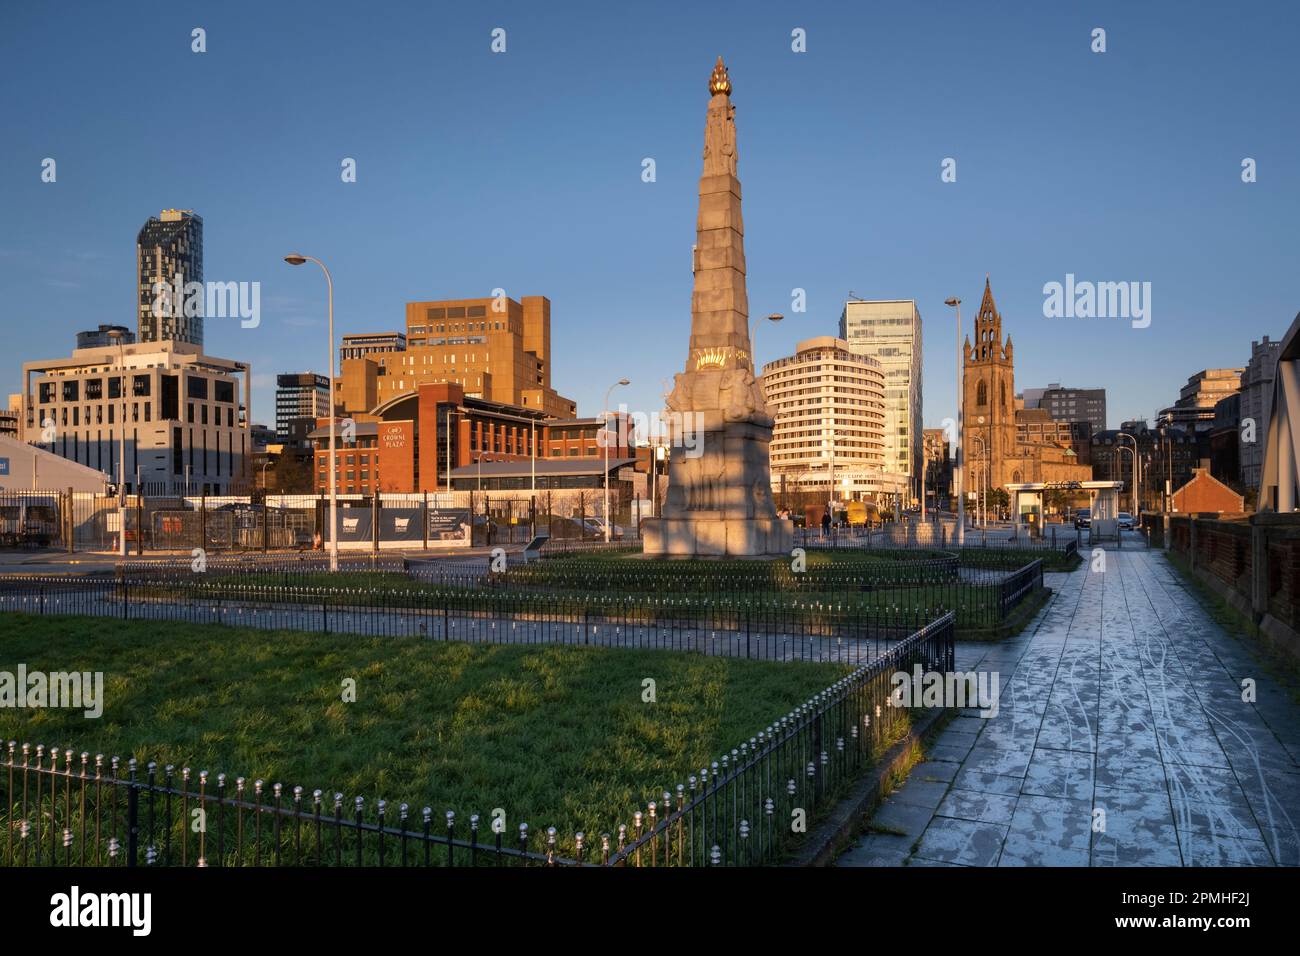 The Titanic Memorial and Gardens, St. Nicholas Place, Pier Head, Liverpool Waterfront, Liverpool, Merseyside, England, United Kingdom, Europe Stock Photo